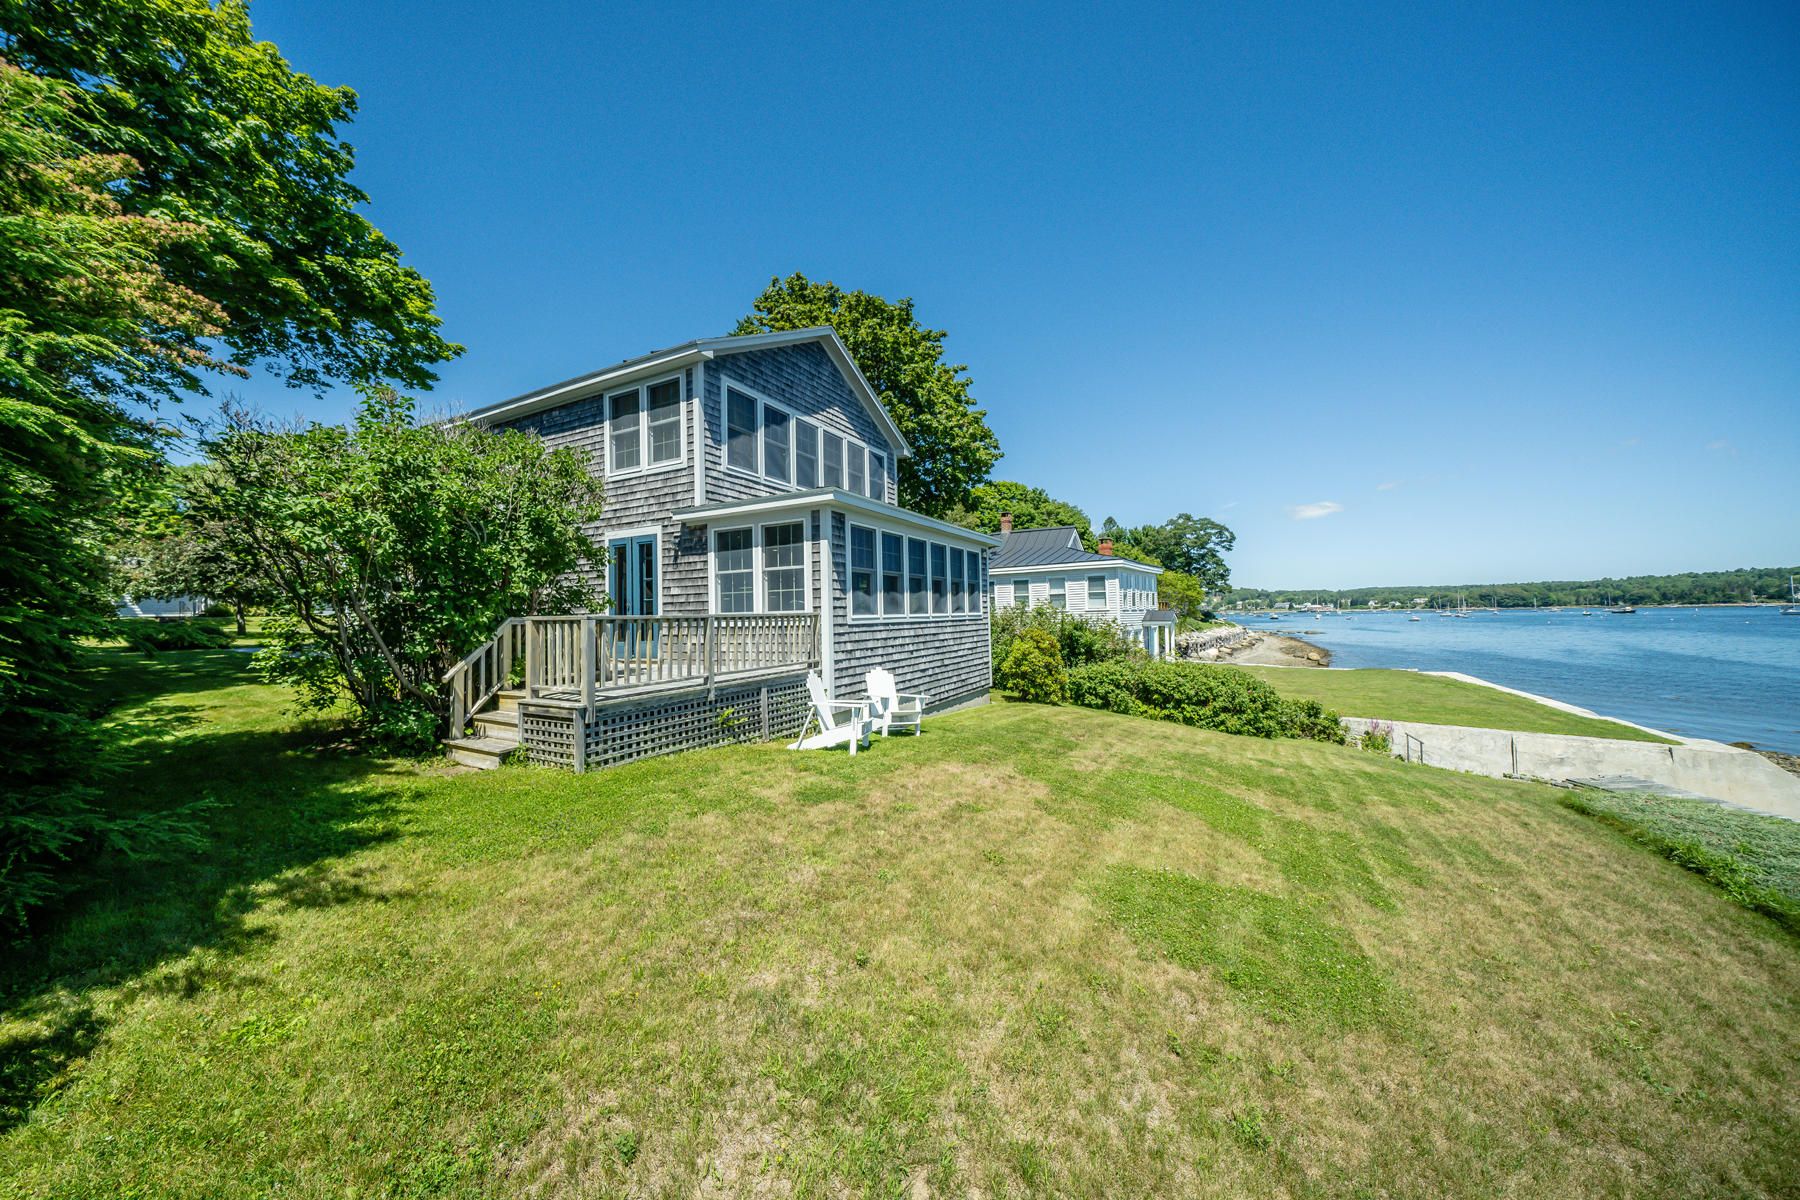 Waterfront home in Belfast Maine has beautiful flowering bushes and perennial plantings that add to the beauty of this year-round coastal haven 